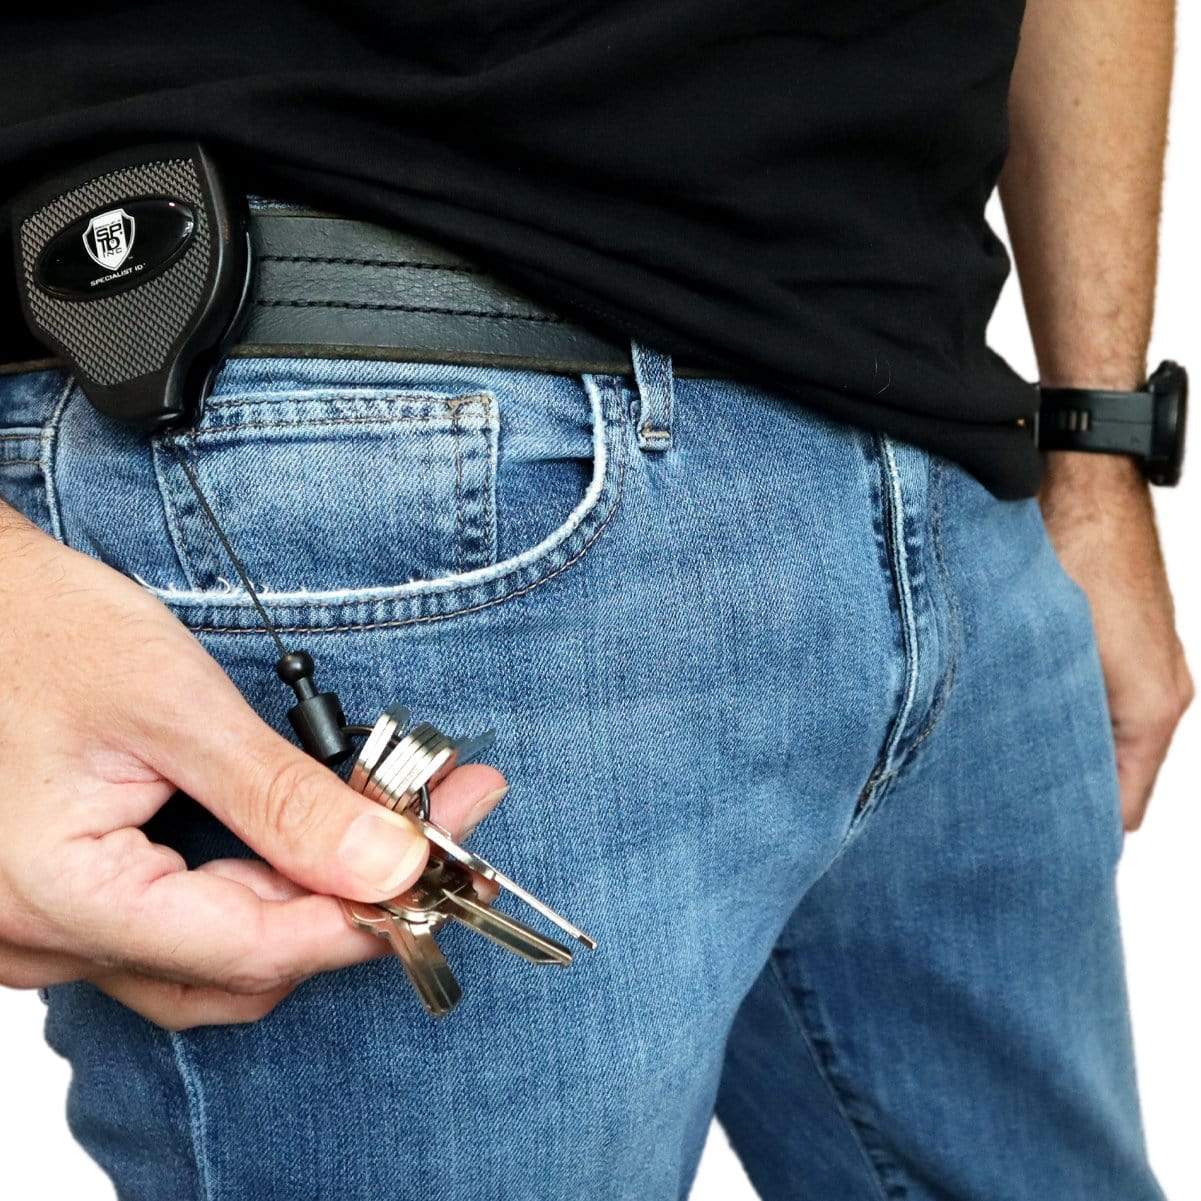 Person wearing a black shirt and blue jeans, holding a set of keys attached to a Super Heavy Duty Retractable Keychain - 8oz or 10 Keys - Durable 48” (4 Ft) Kevlar Lanyard clipped to their waistband.